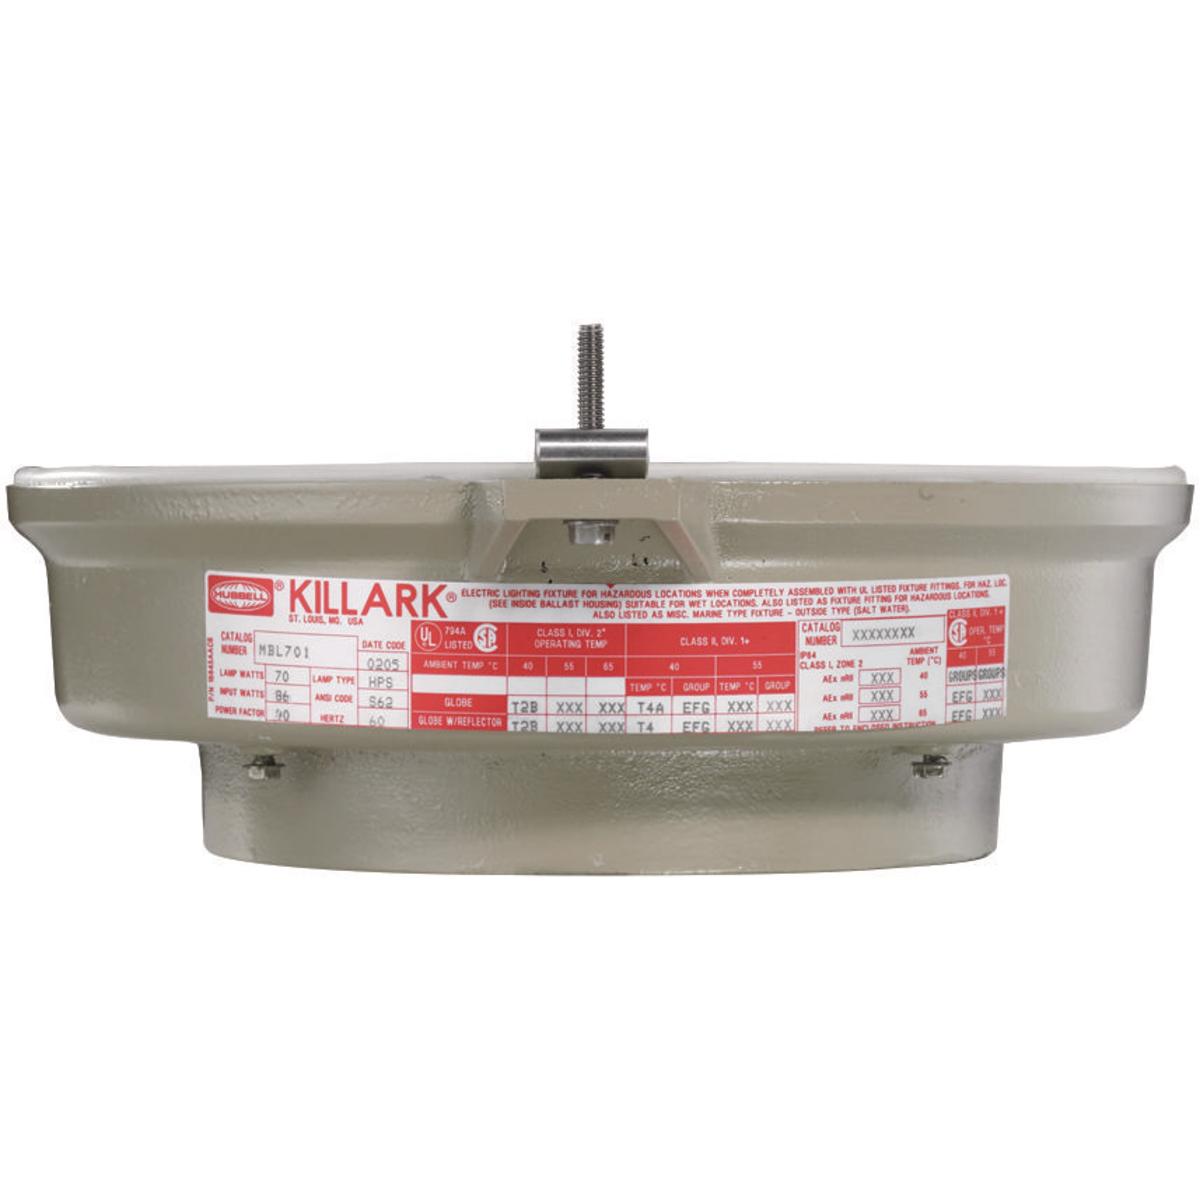 Hubbell VM2H075 VM2 Series - 70W Metal Halide 480V - Housing  ; The VM2 Series is a low profile, low bay HID luminaire. The design of the VM2 makes it suitable for harsh and hazardous environments using a cast copper-free aluminum housing and mount. Its low profile desig